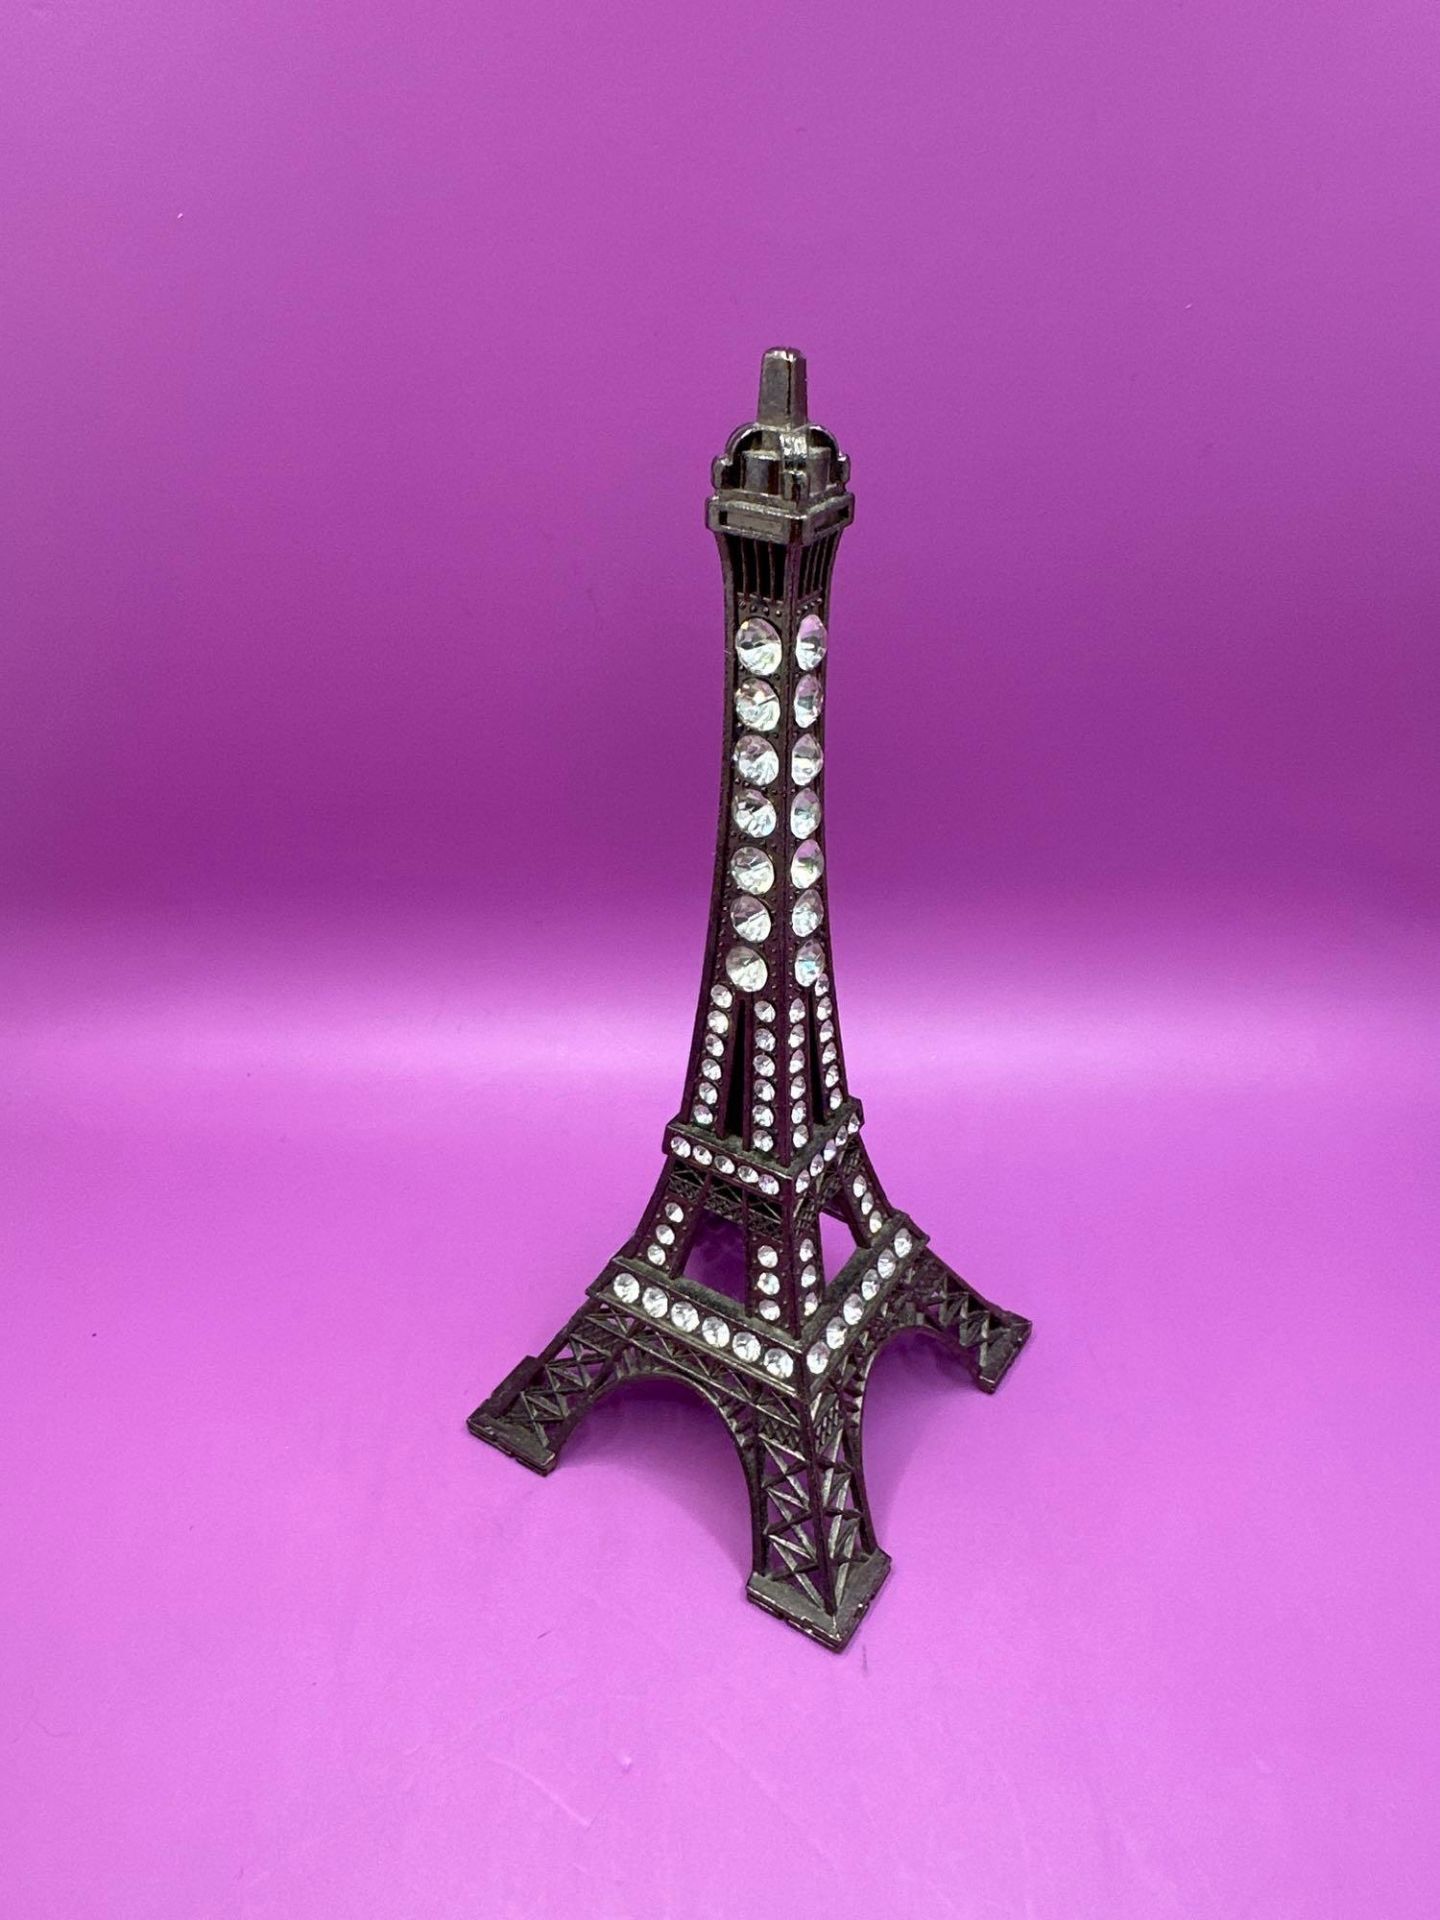 Metal Eiffel Tower With Gem Stones - Image 2 of 4